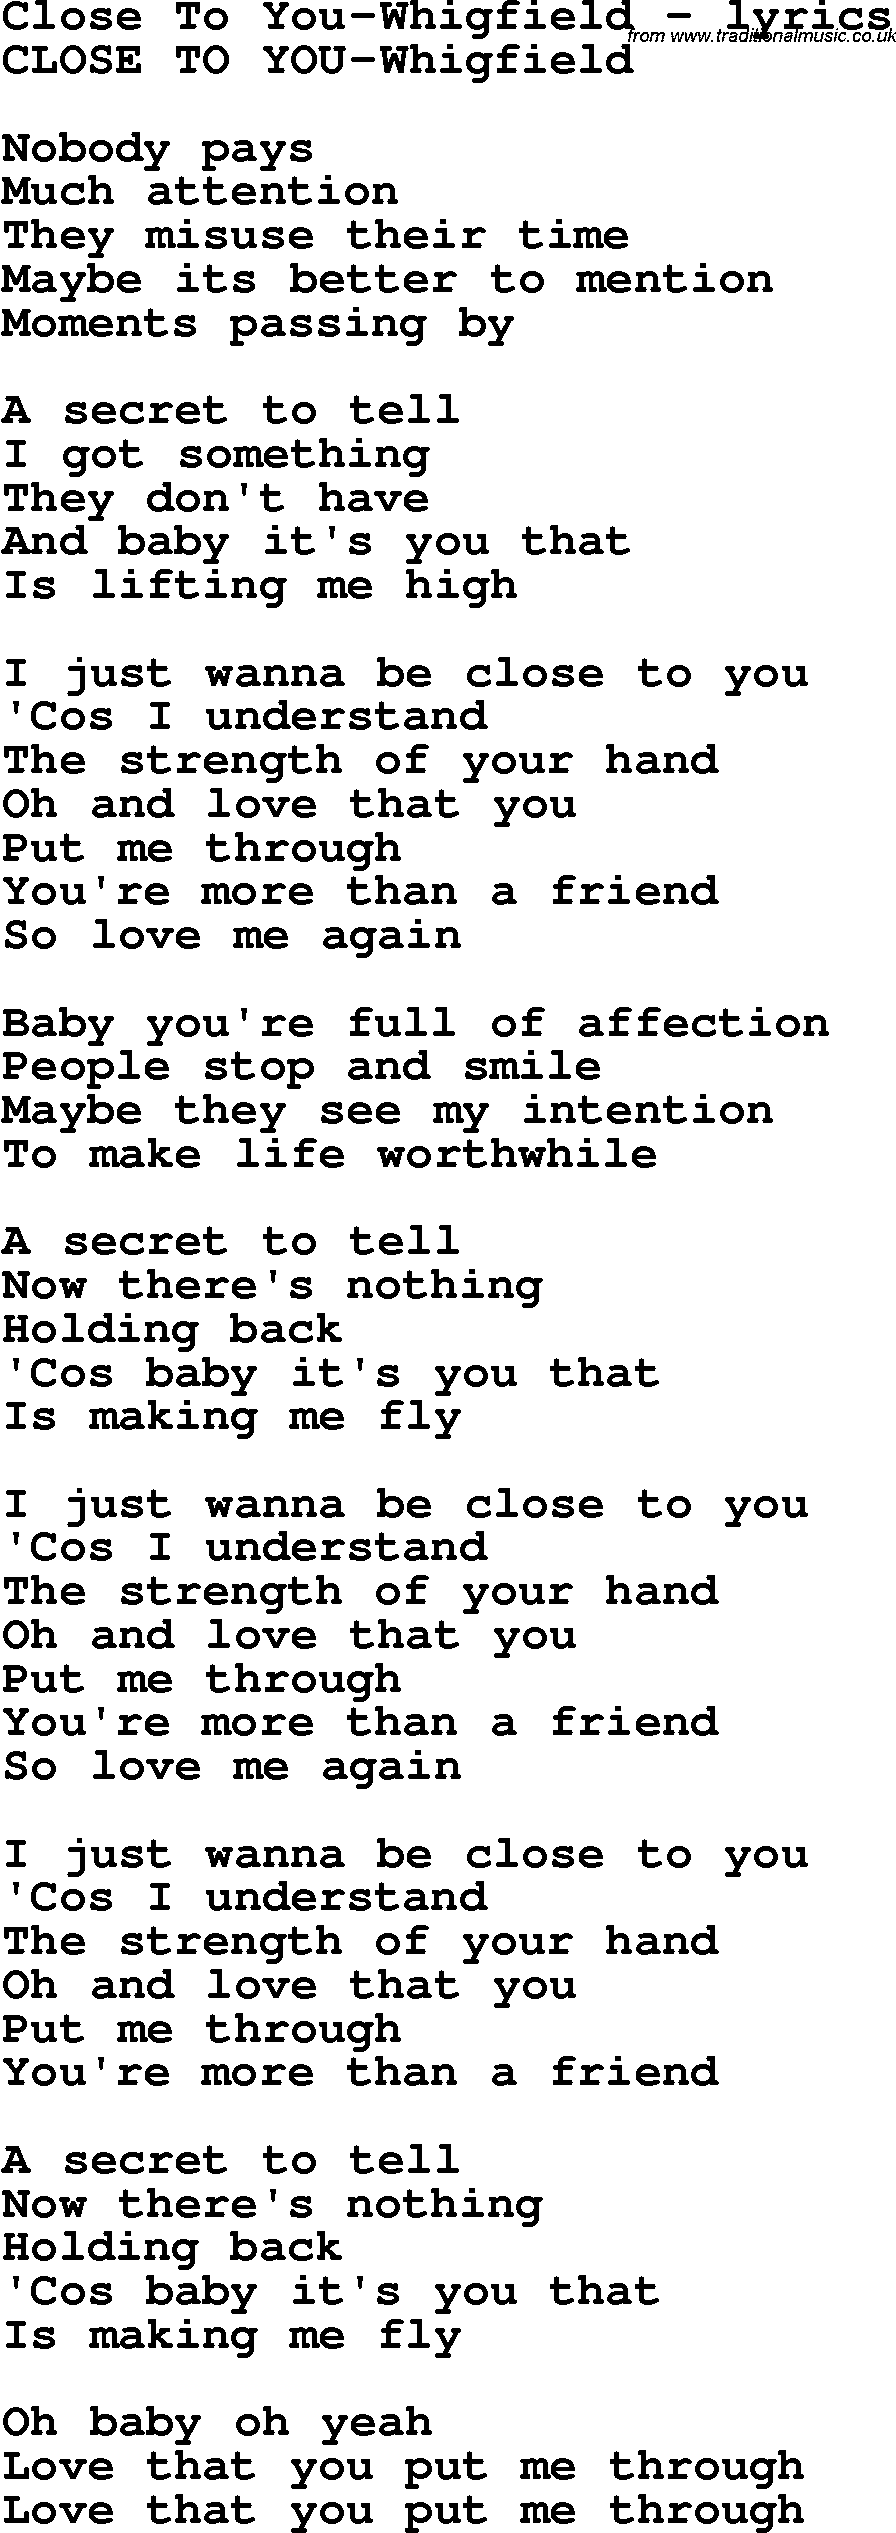 Love Song Lyrics for: Close To You-Whigfield